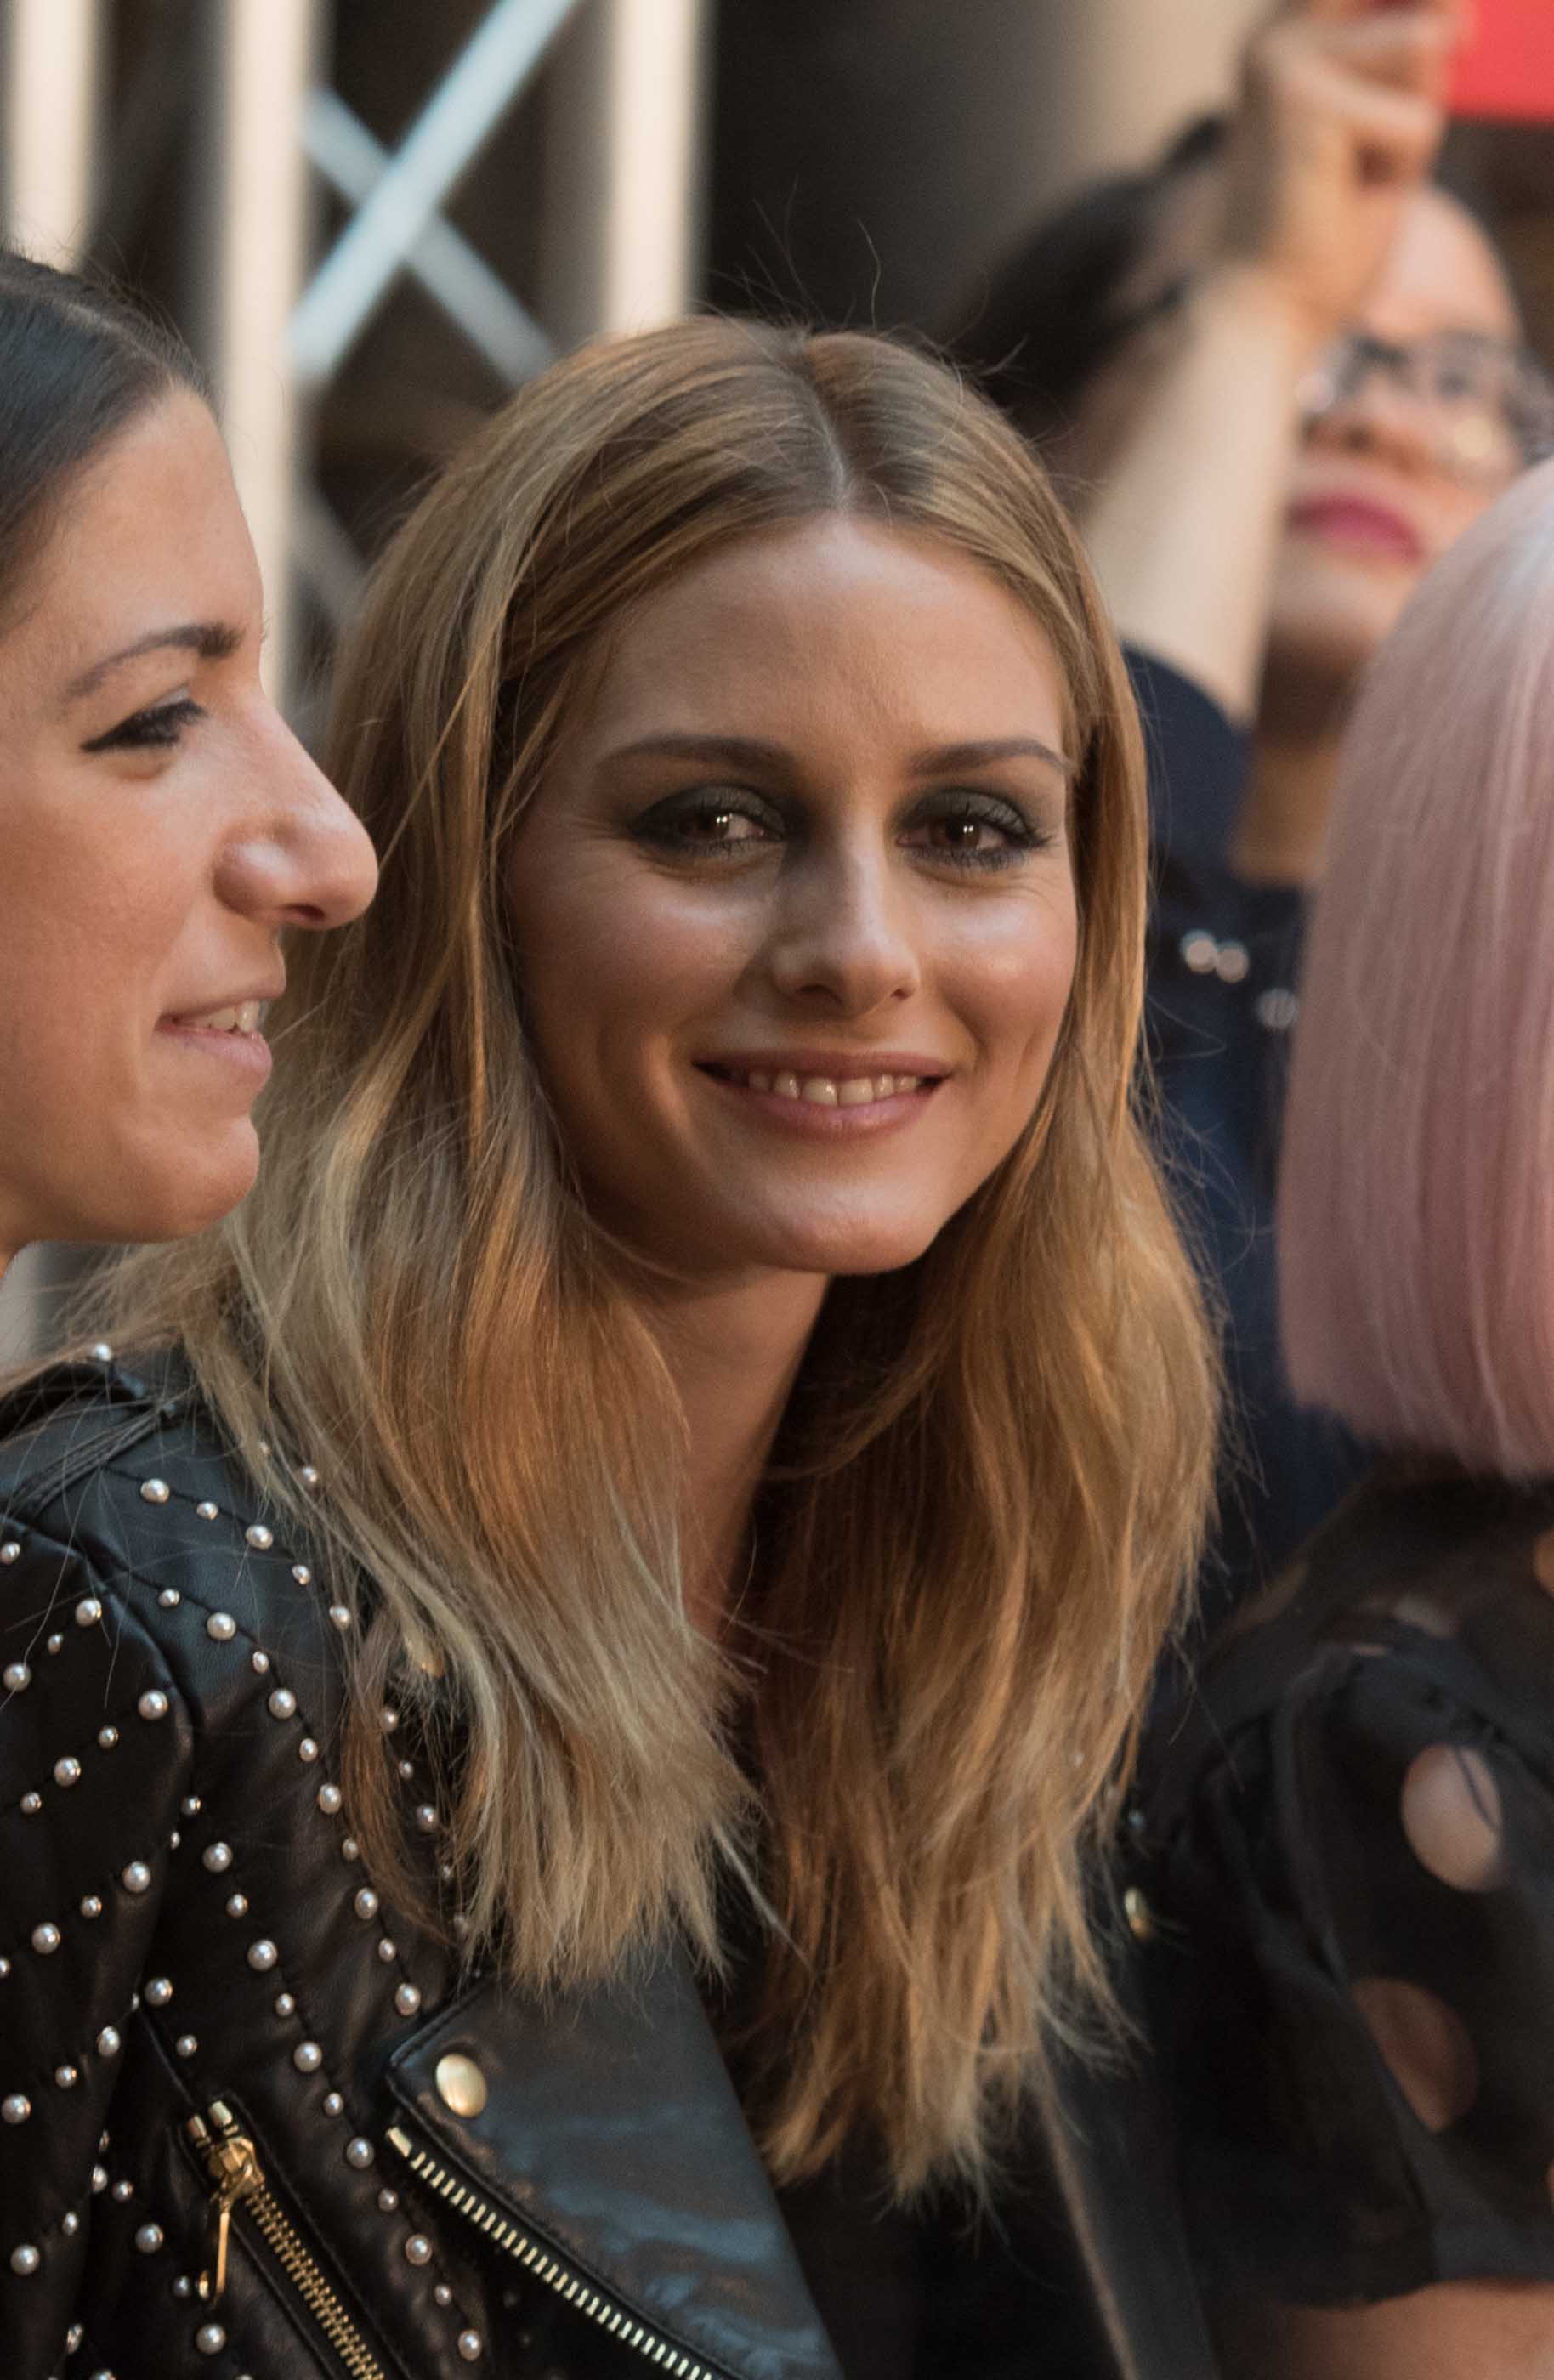 Olivia Palermo attends Alexis Mabille Haute Couture FW show